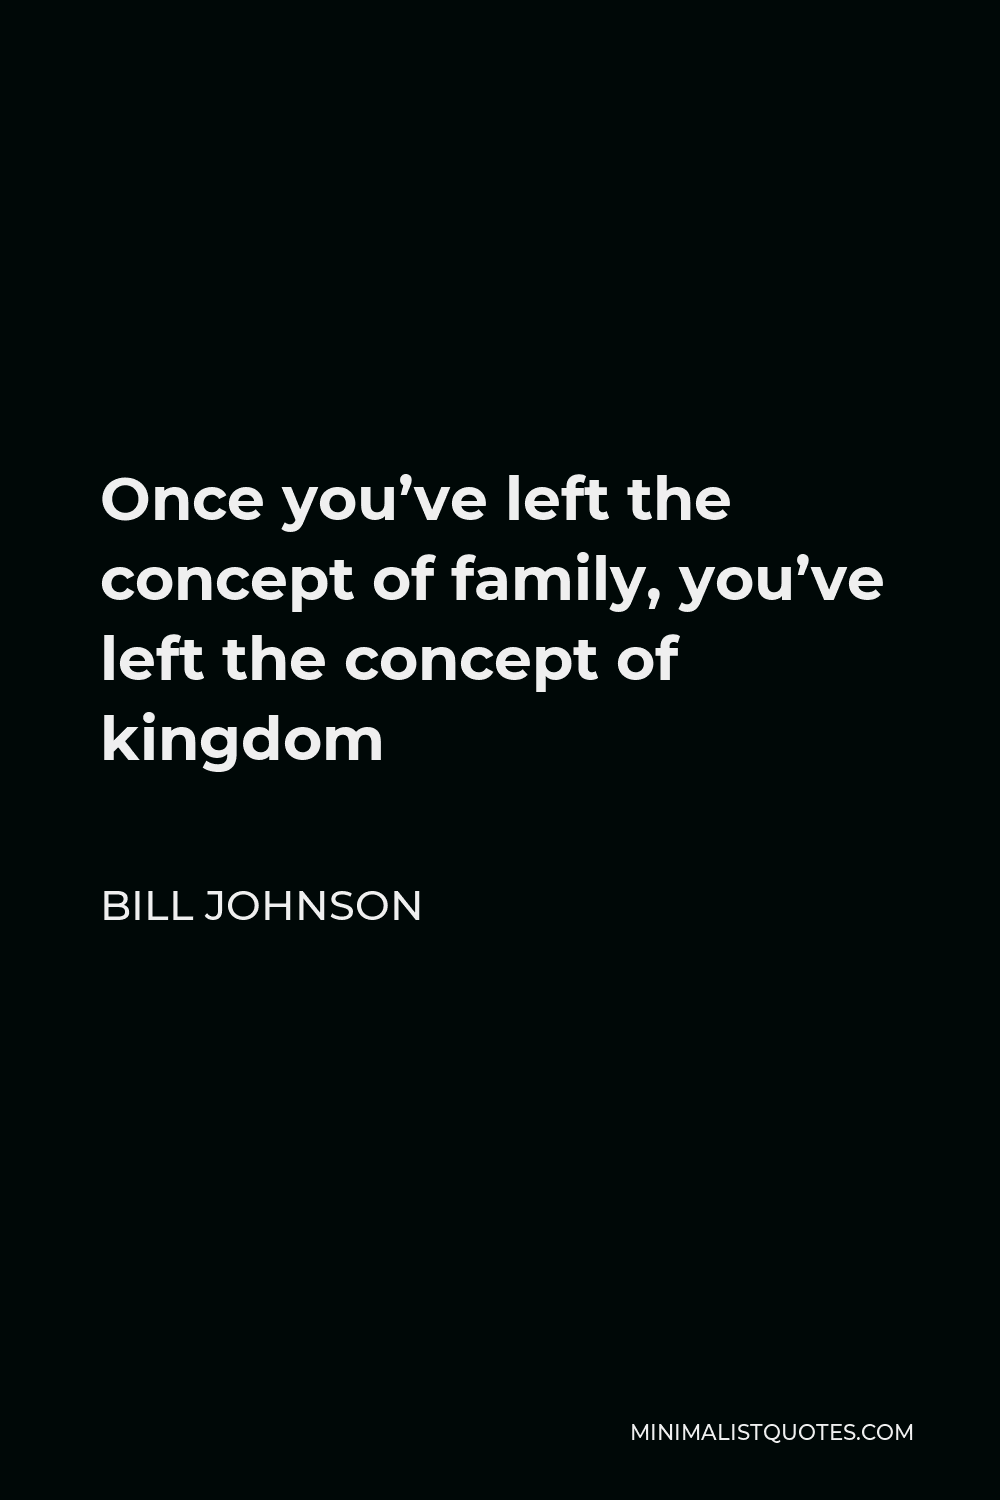 Bill Johnson Quote - Once you’ve left the concept of family, you’ve left the concept of kingdom